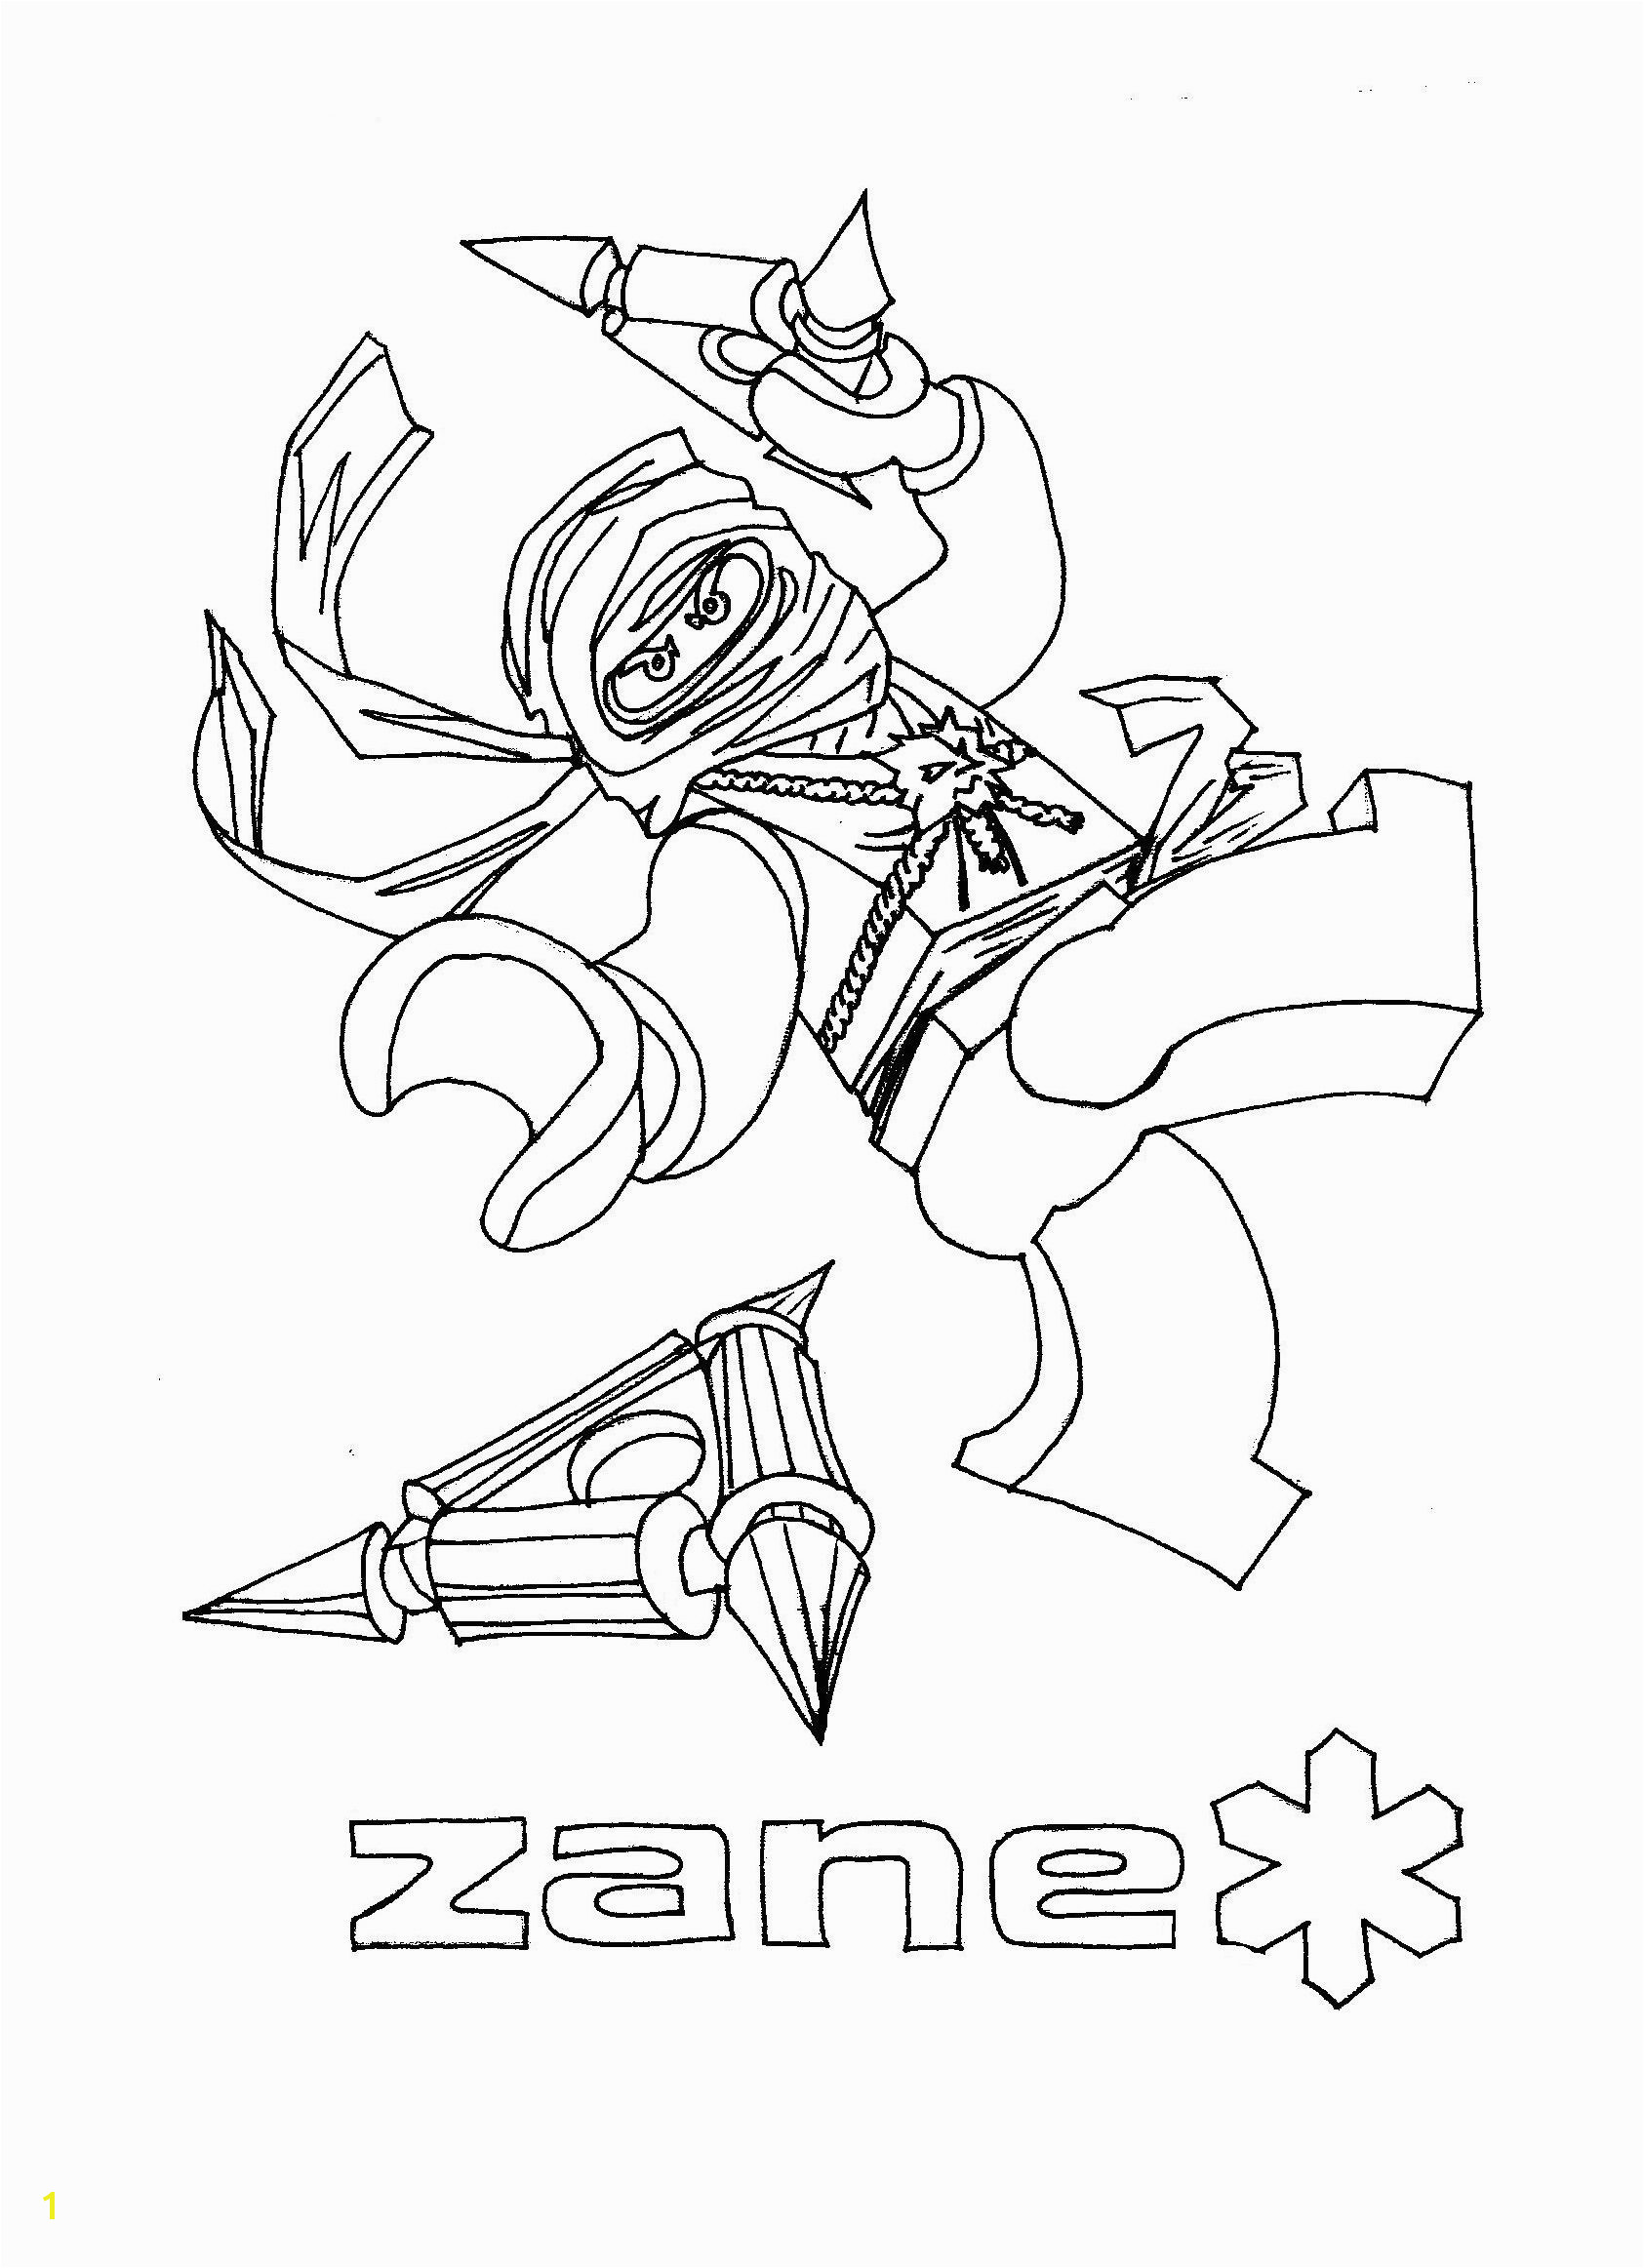 Printable Coloring Pages Lego Coloring Pages Ninjago Zane and the Rest Of the Ninja